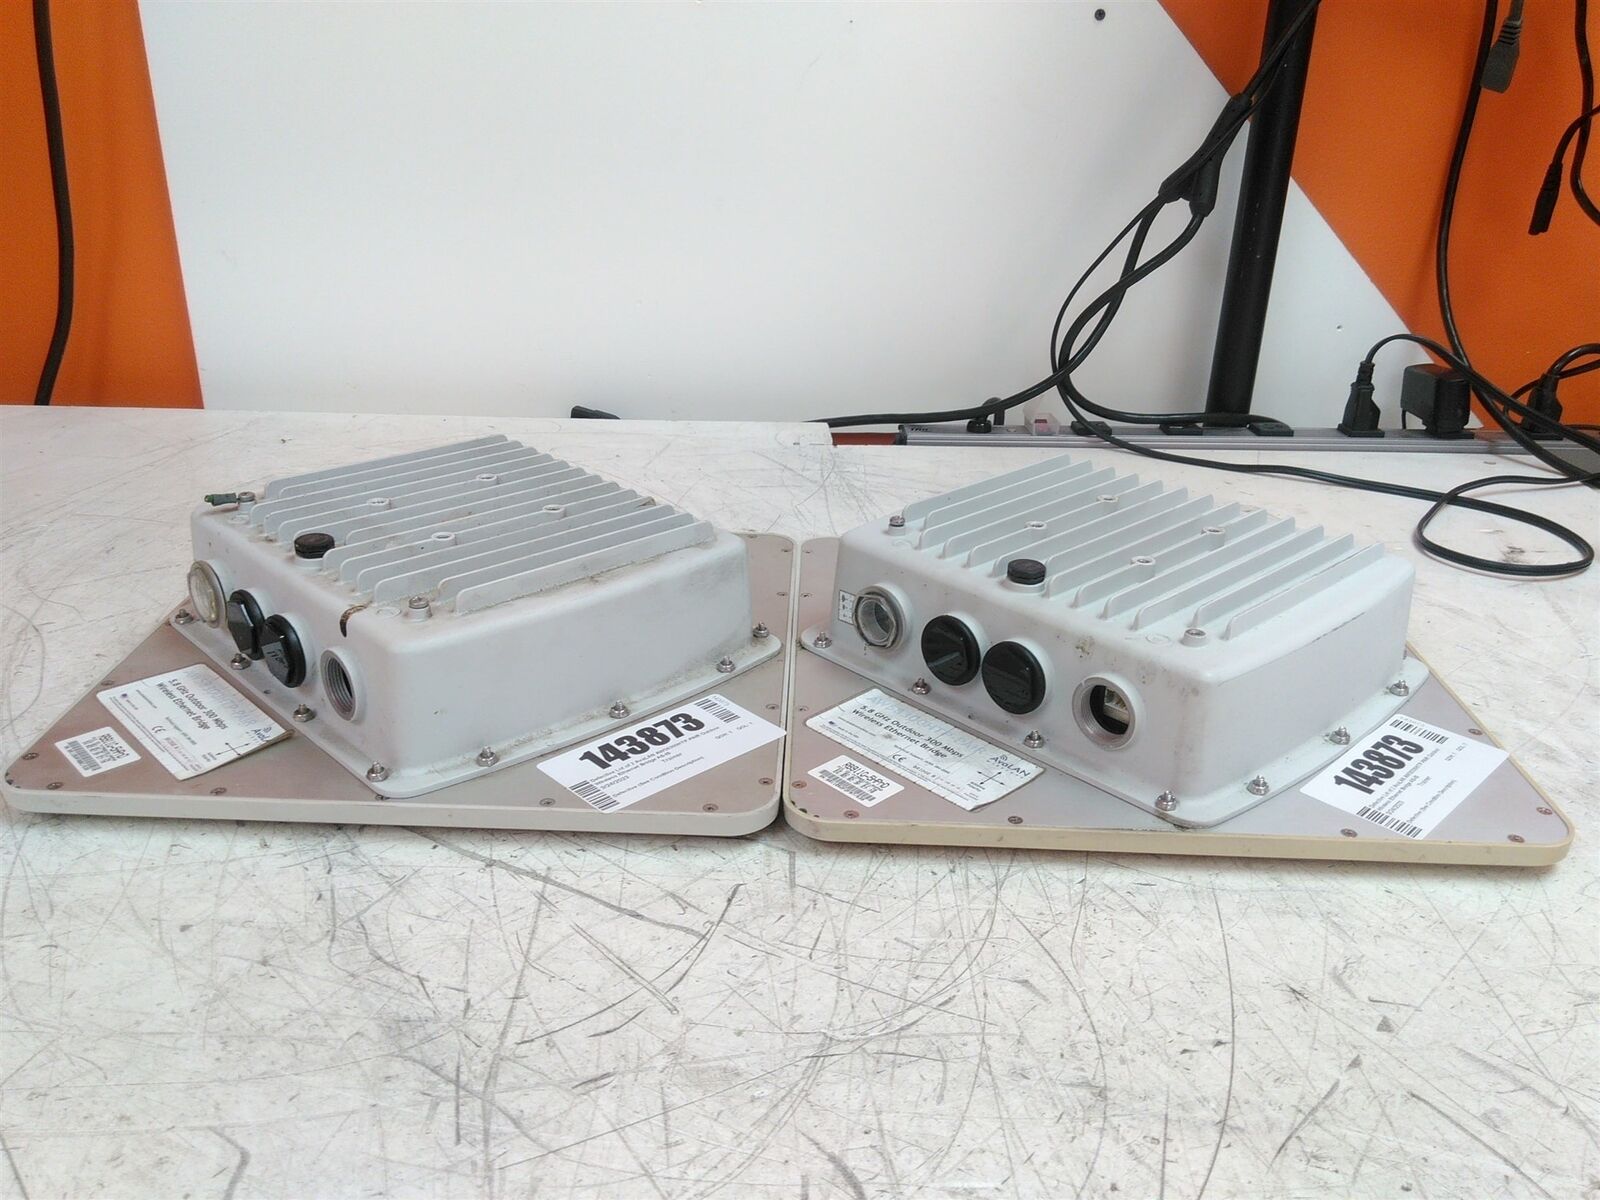 Defective Lot of 2 AvaLAN AW58300HTP-PAIR Outdoor Wireless Ethernet Bridge AS-IS